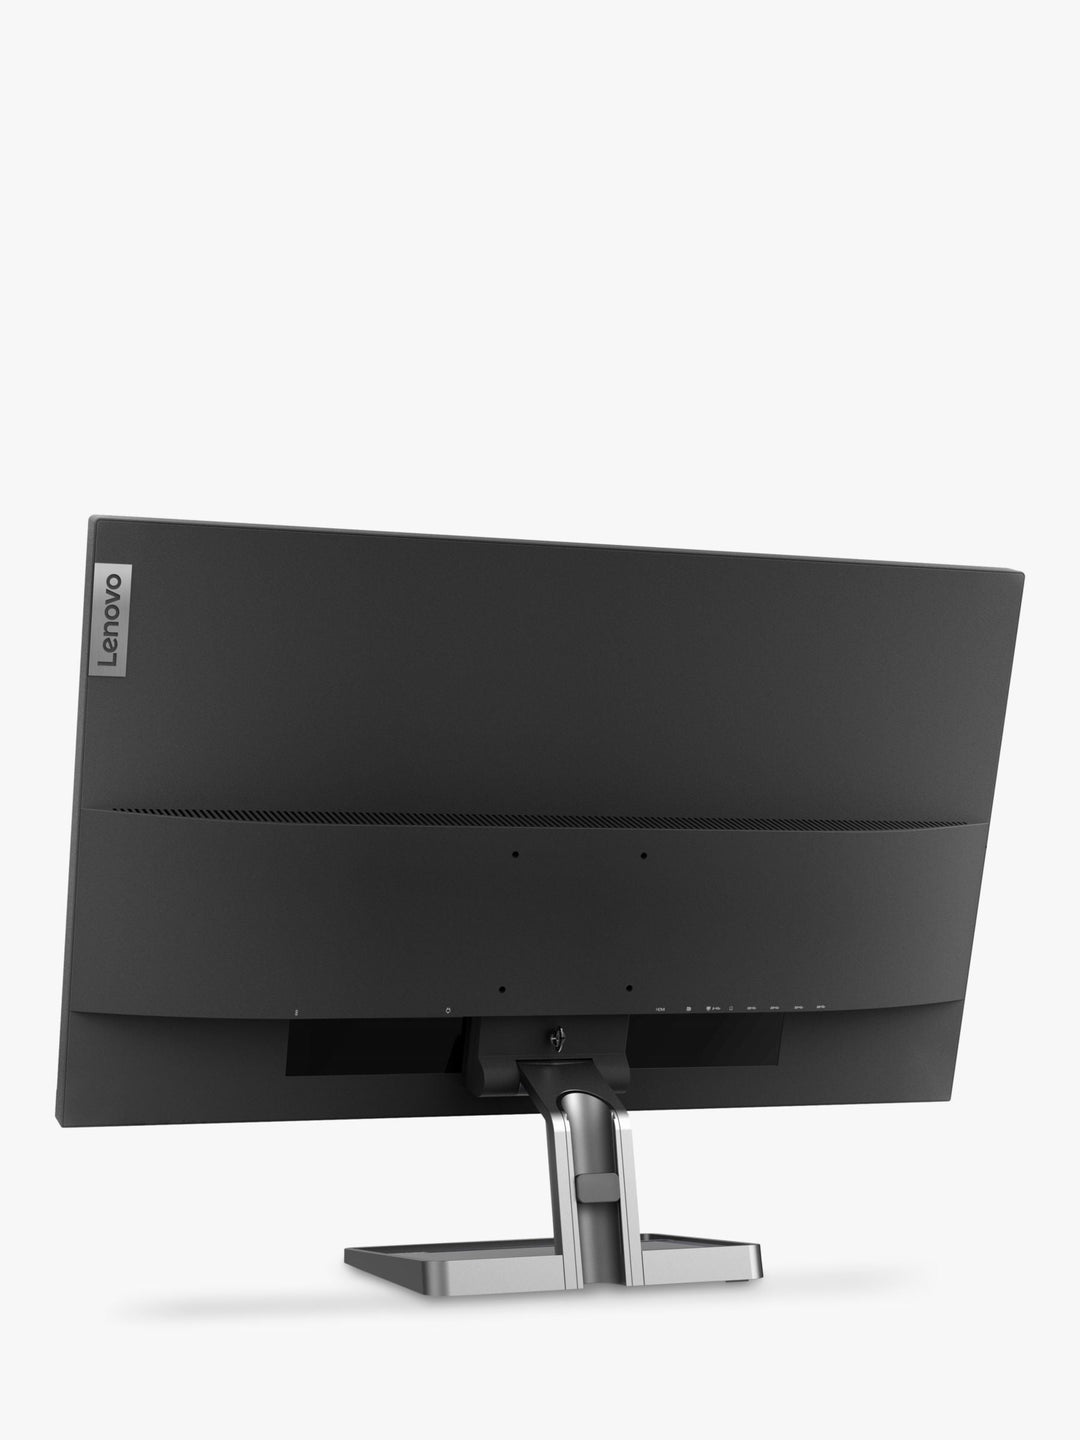 Lenovo L32p-30 4K UHD Monitor 31.5" | Gaming | Ultrathin Bezel | 6.8KG | WLED Panel | Wide Viewing Angles